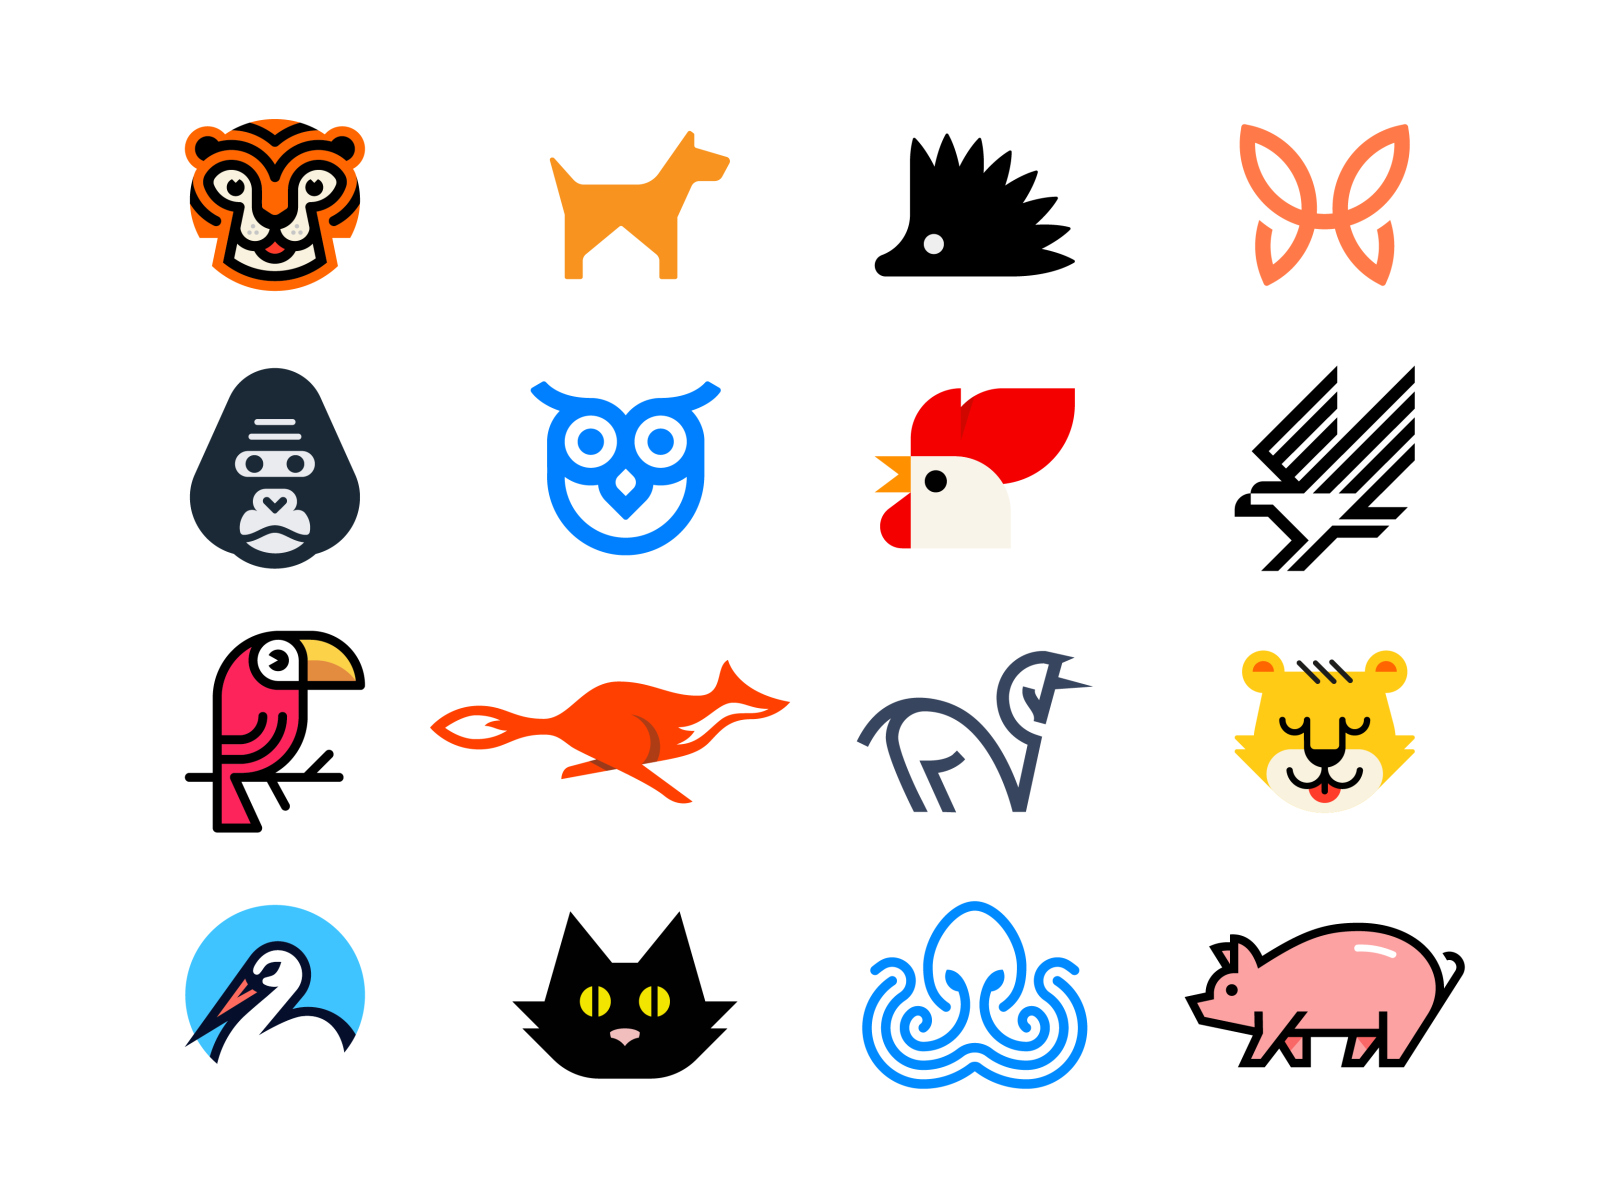 Logos with animals